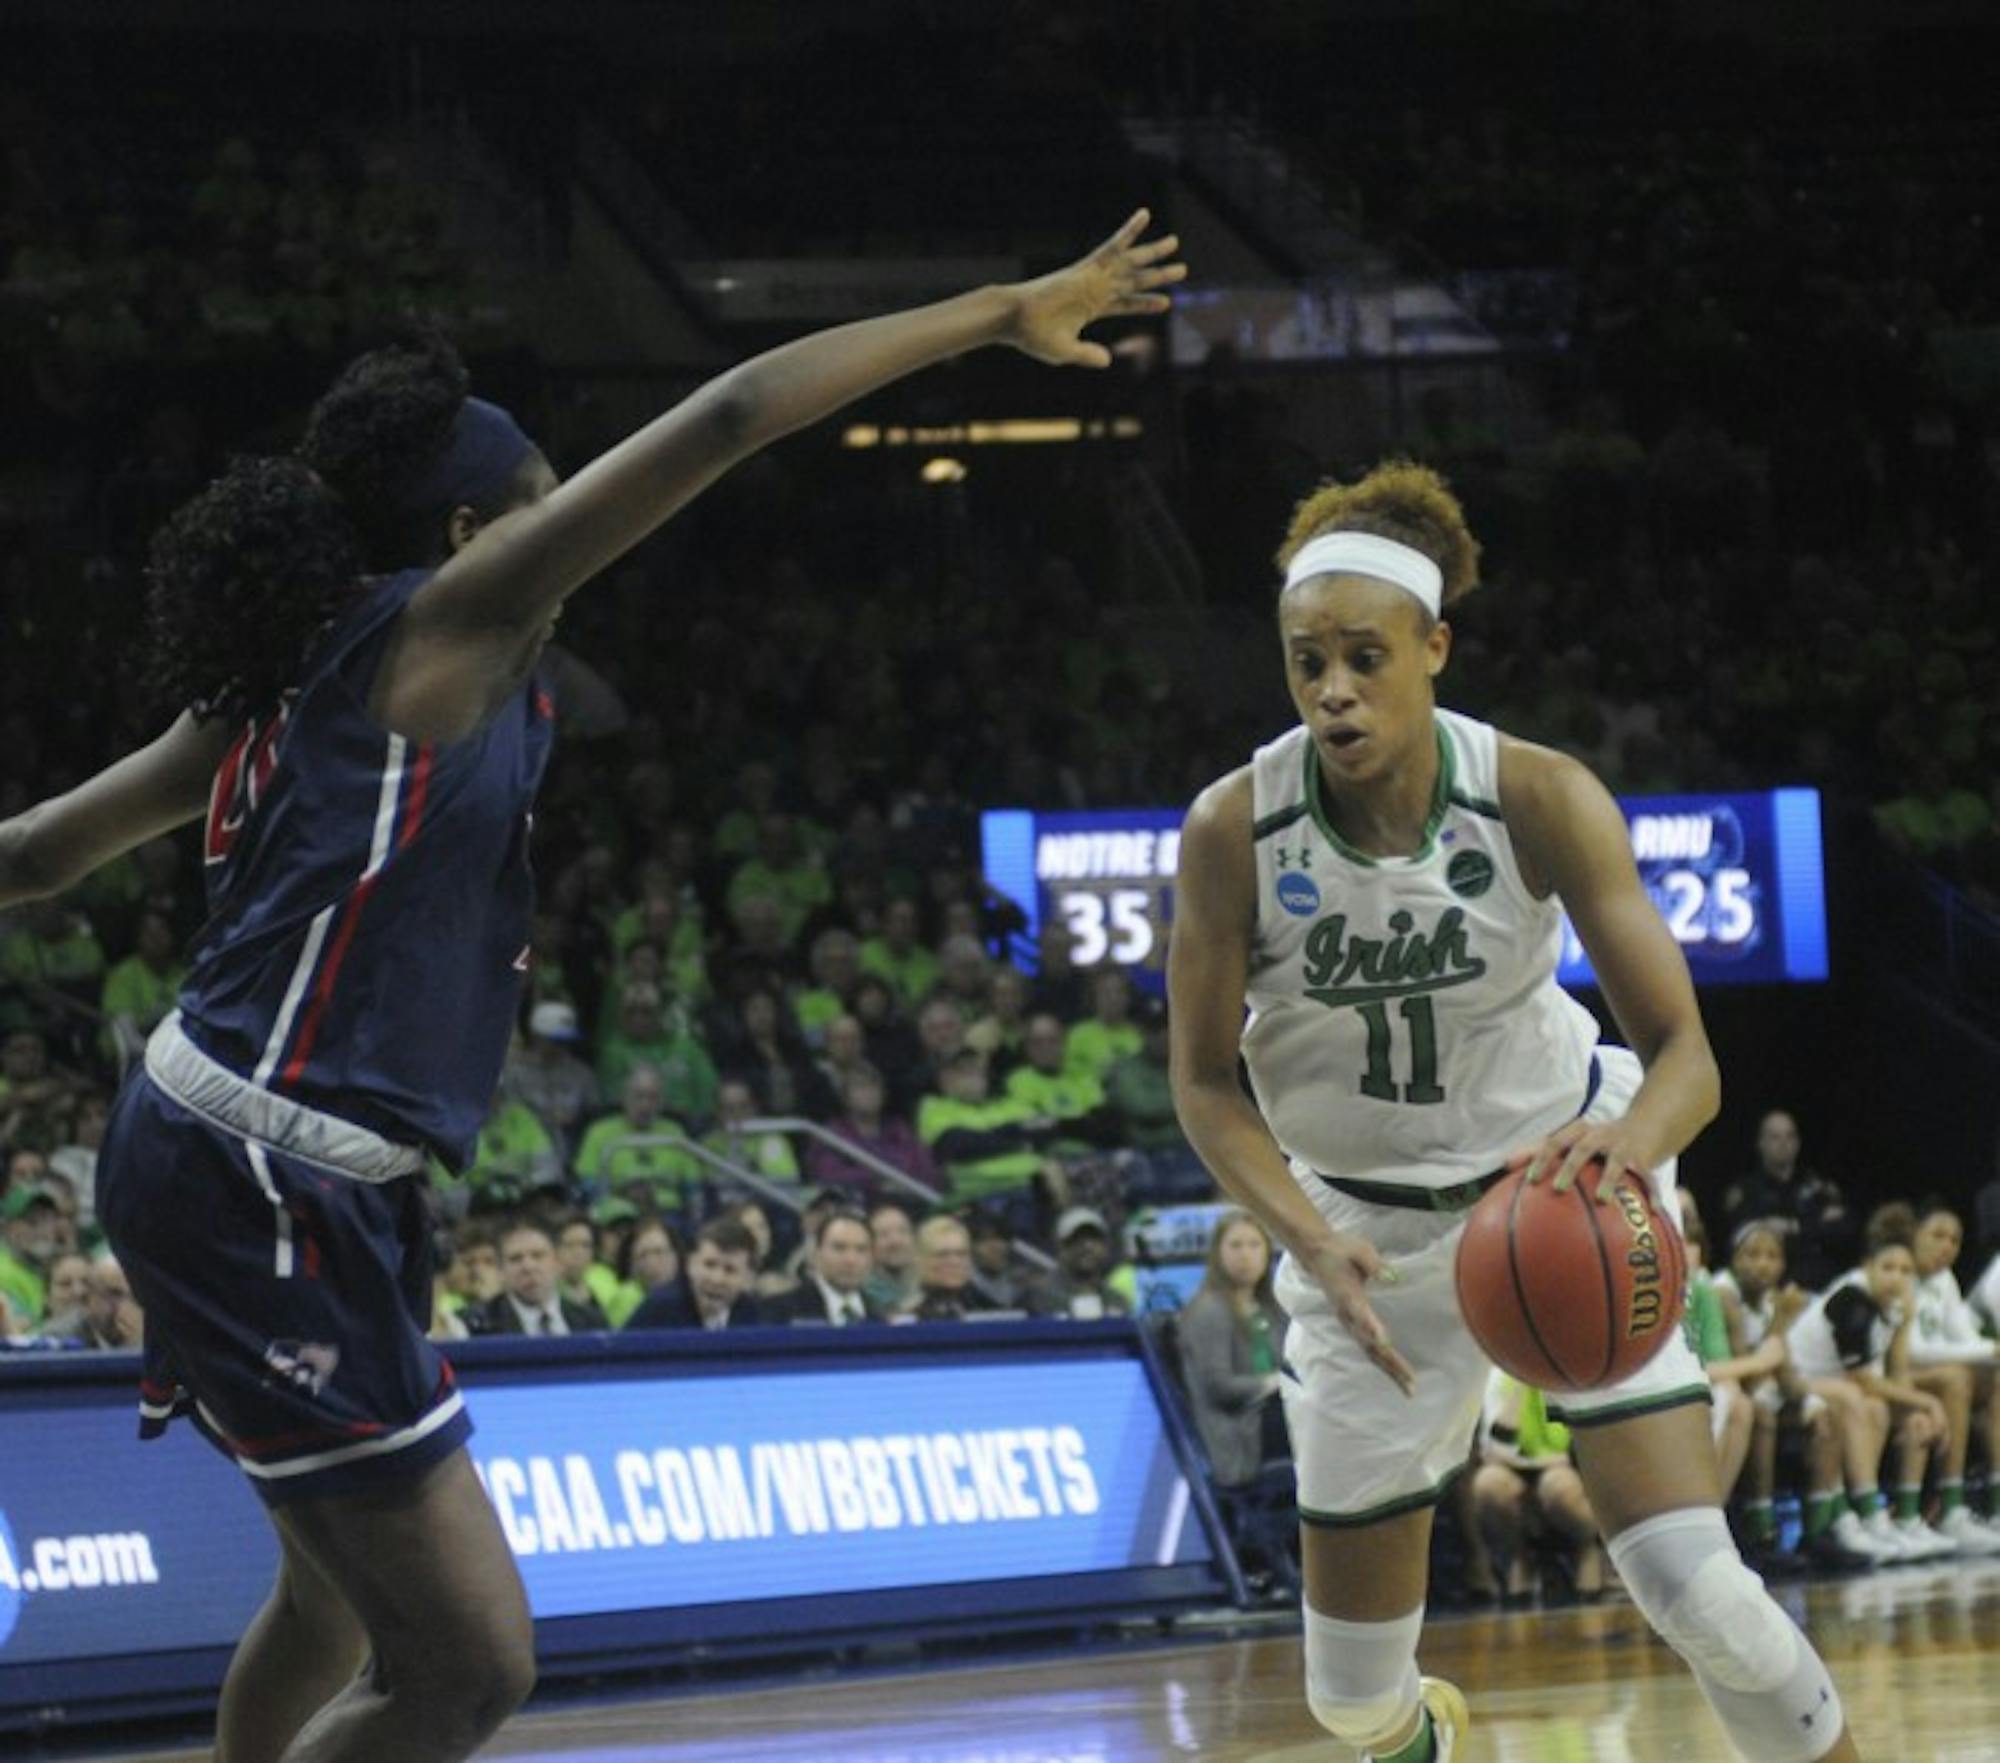 Irish junior forward Brianna Turner drives down the lane during Notre Dame’s 79-49 win over Robert Morris on Friday at Purcell Pavilion.